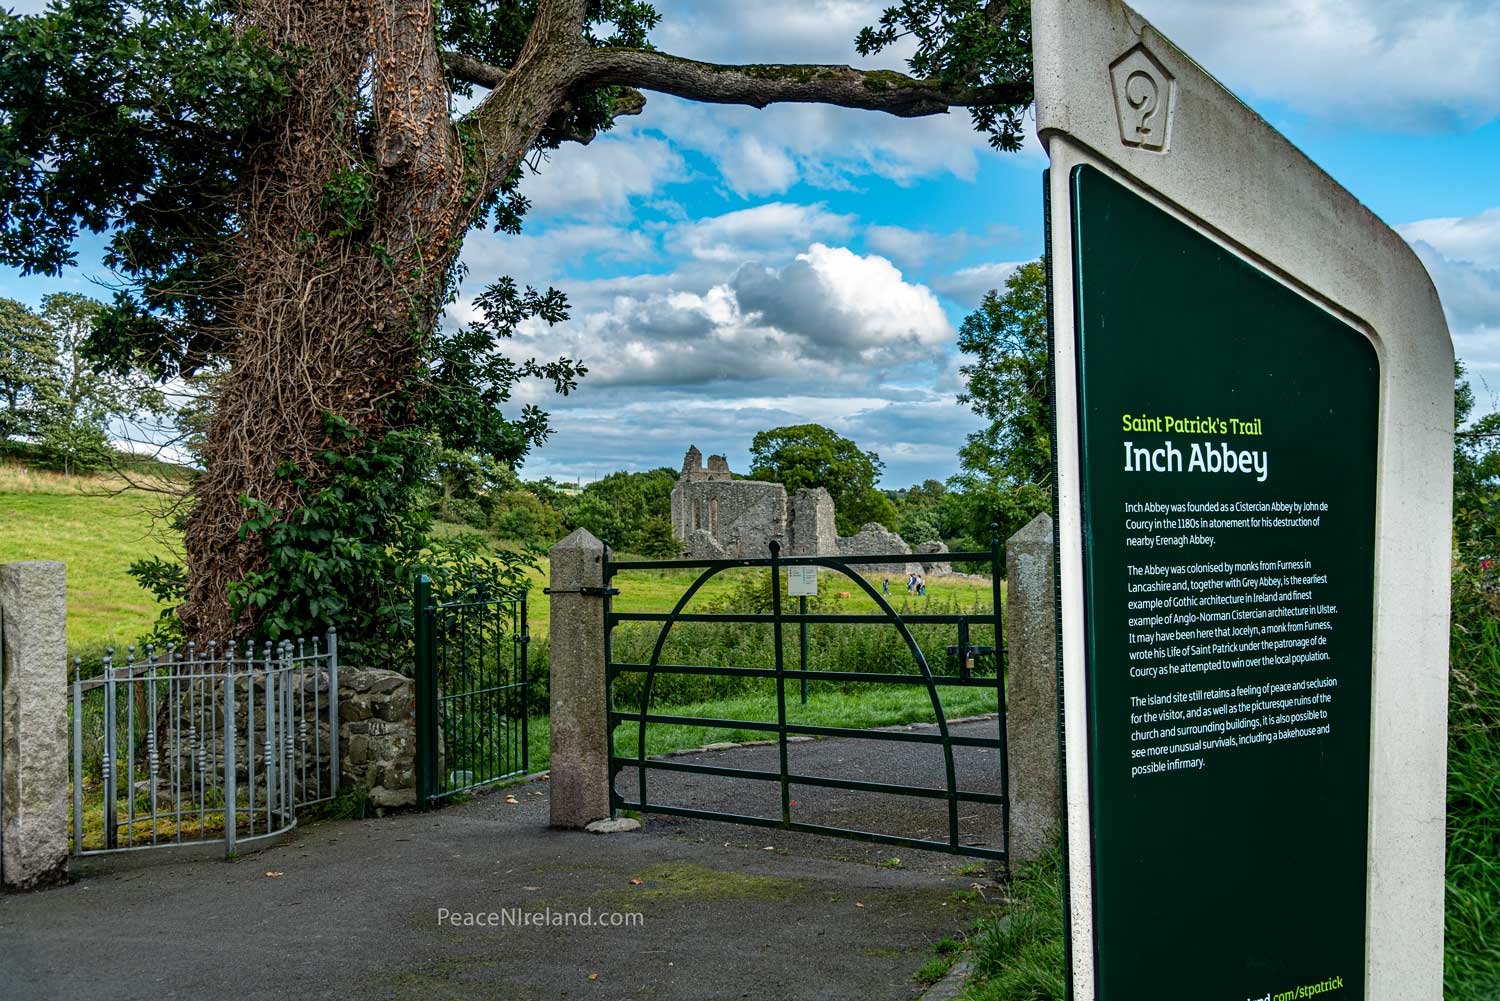 Part of St Patrick's Trail and popular site for visitors in Downpatrick